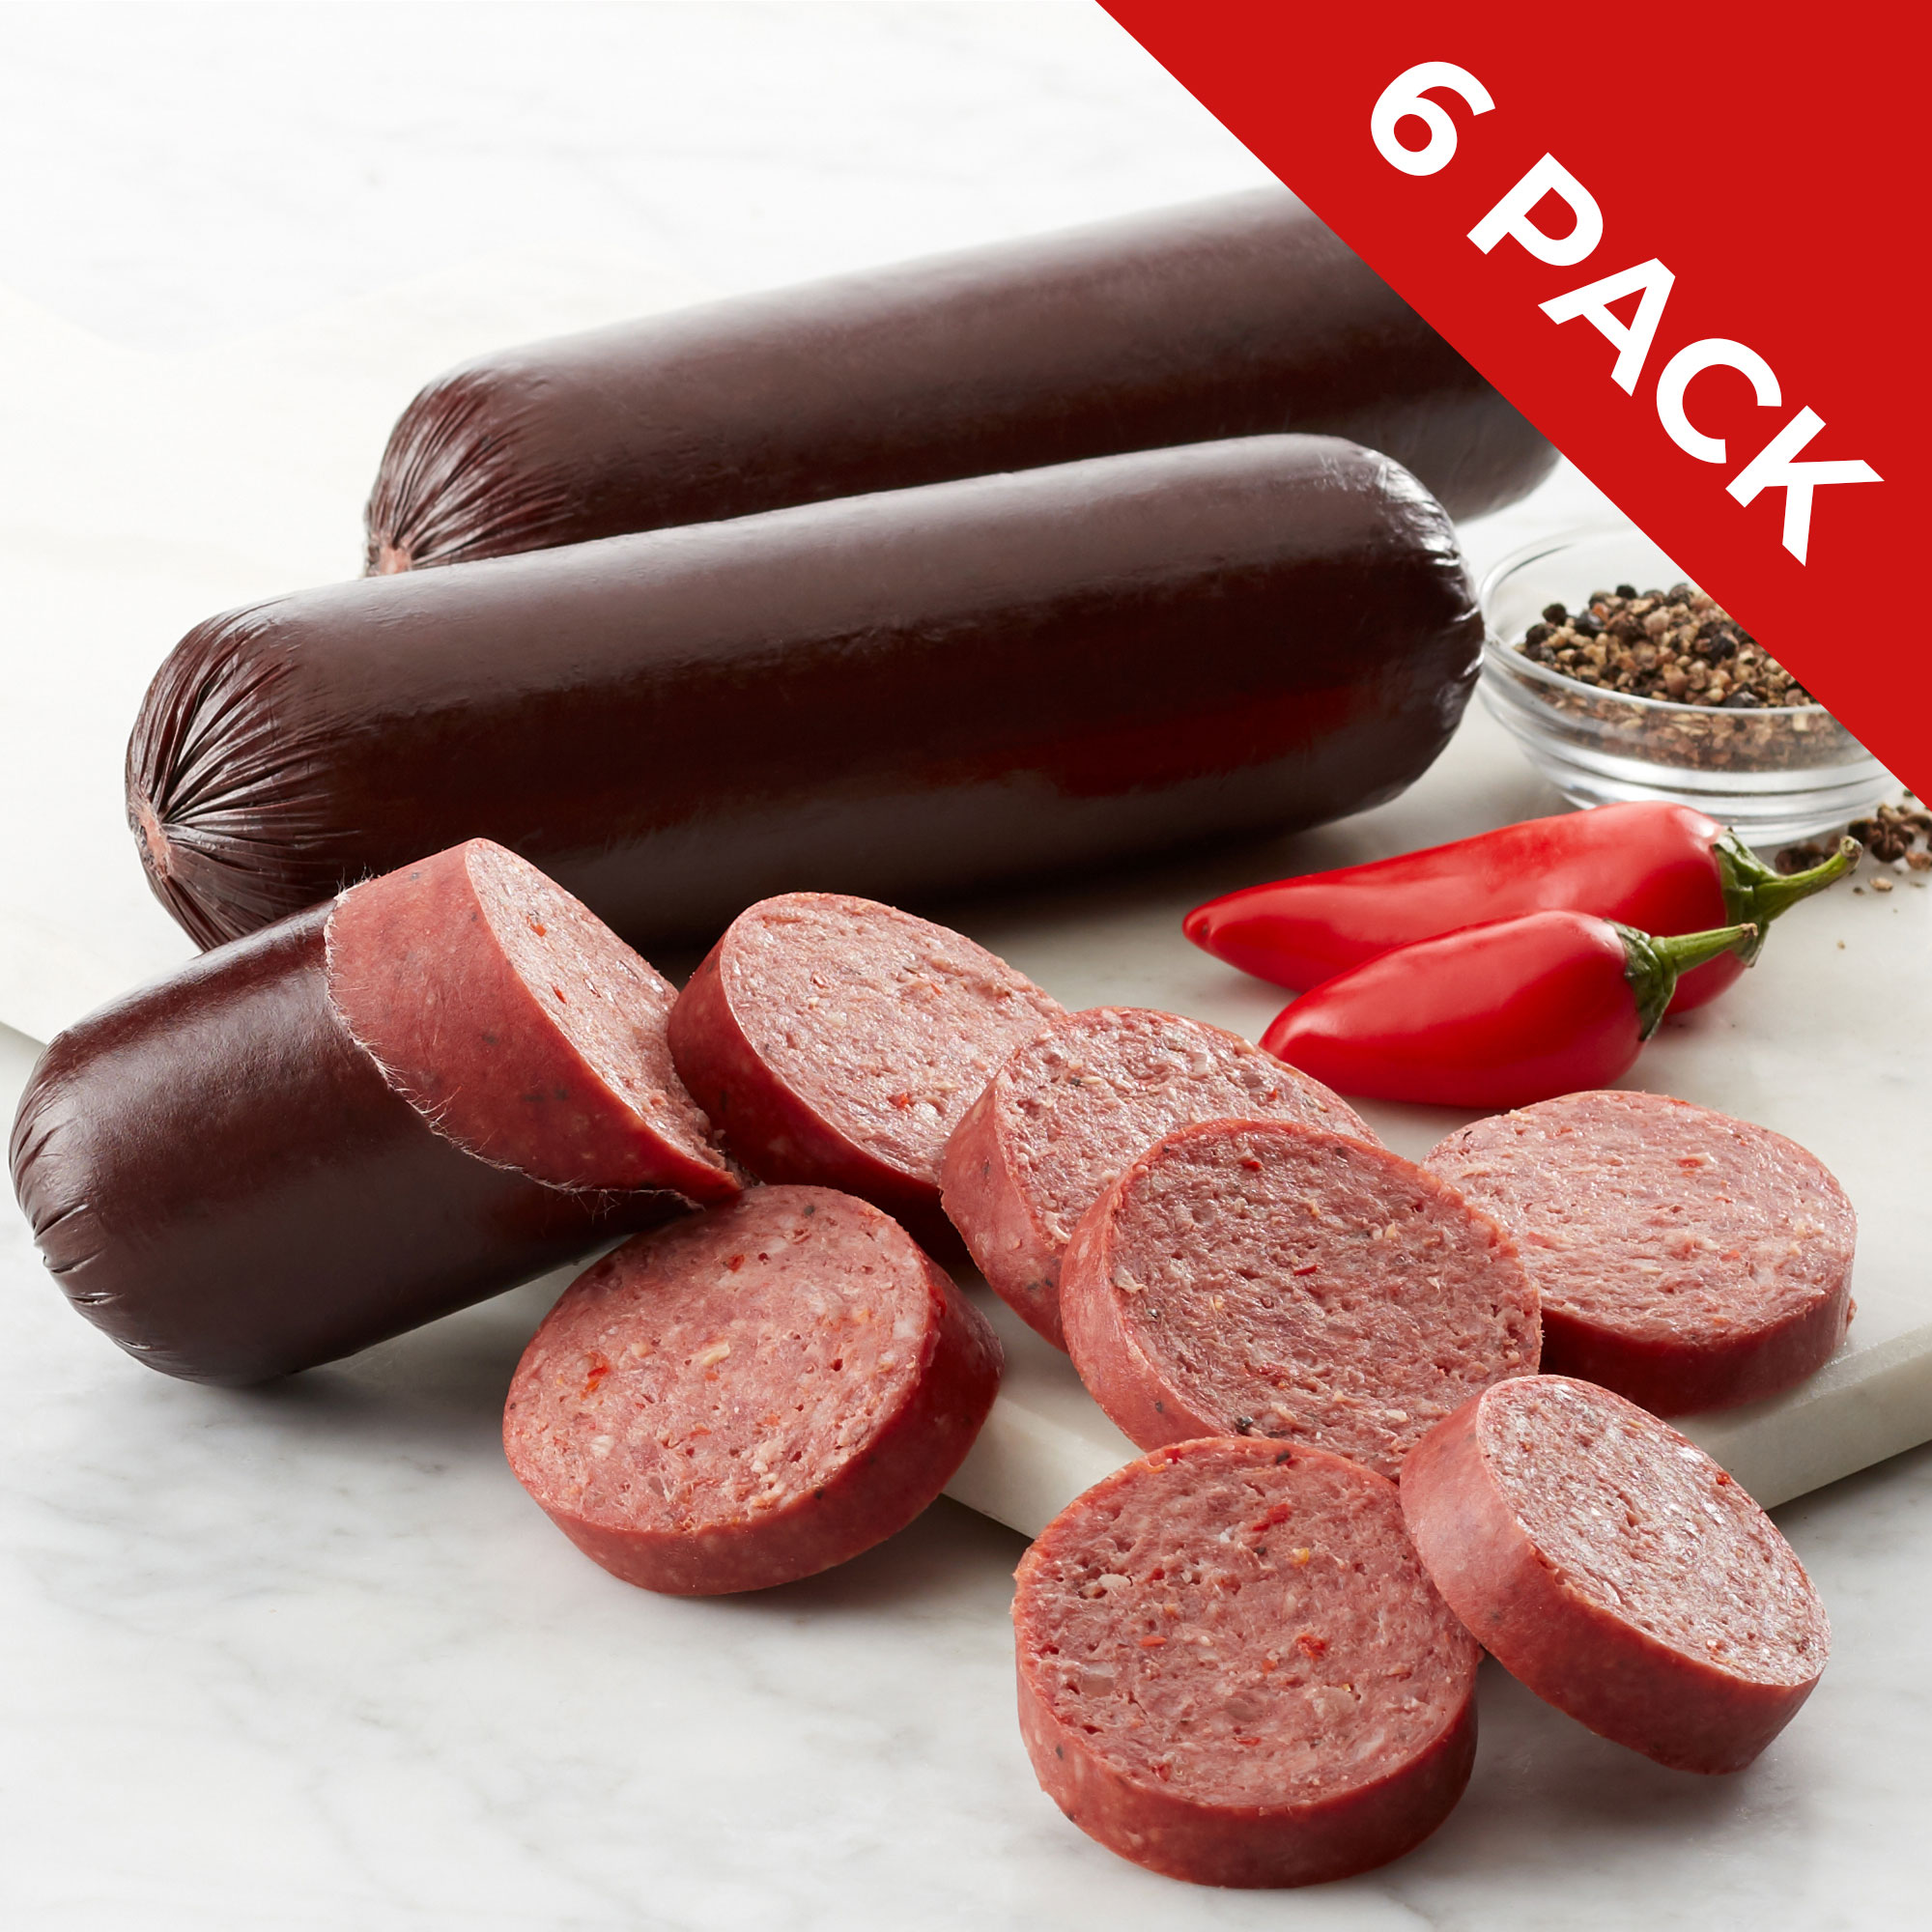 https://www.hickoryfarms.com/on/demandware.static/-/Sites-Web-Master-Catalog/default/dw329099f8/images/products/spicy-beef-summer-sausage-6pack-016083-1.jpg